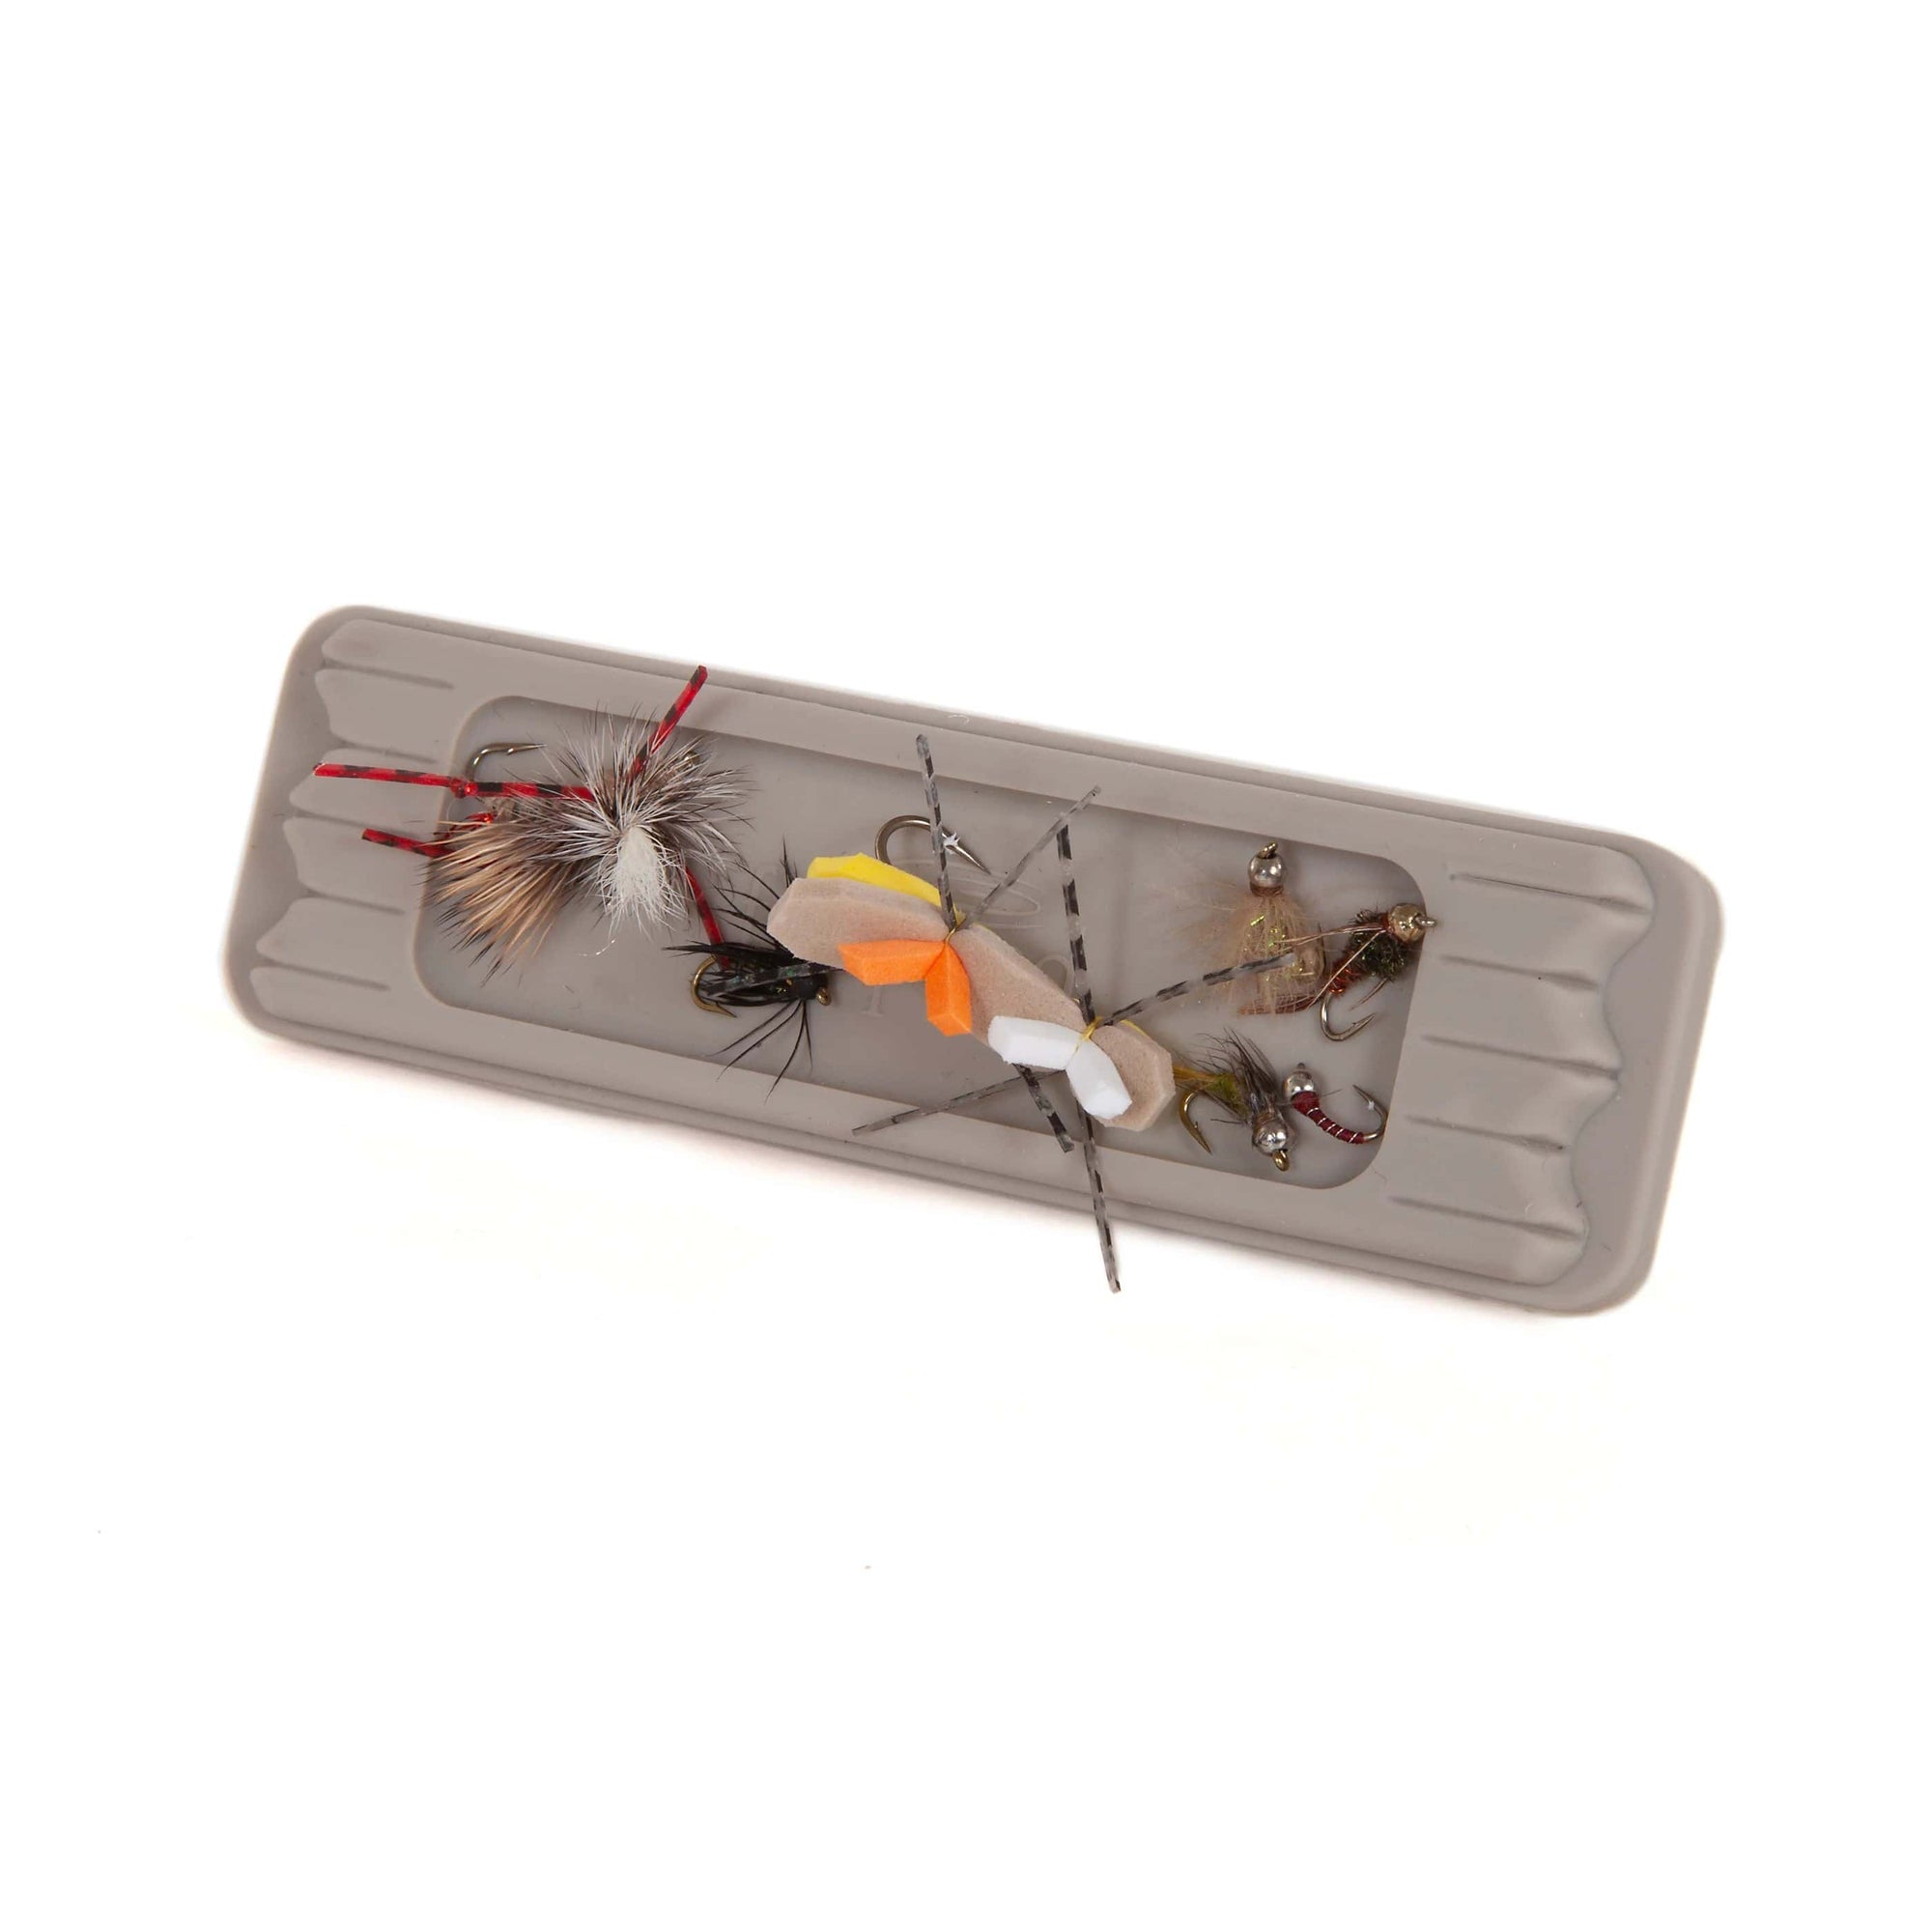 DURABLE ACRYLIC HOLDER for Fly Fishing Lures Store and Display